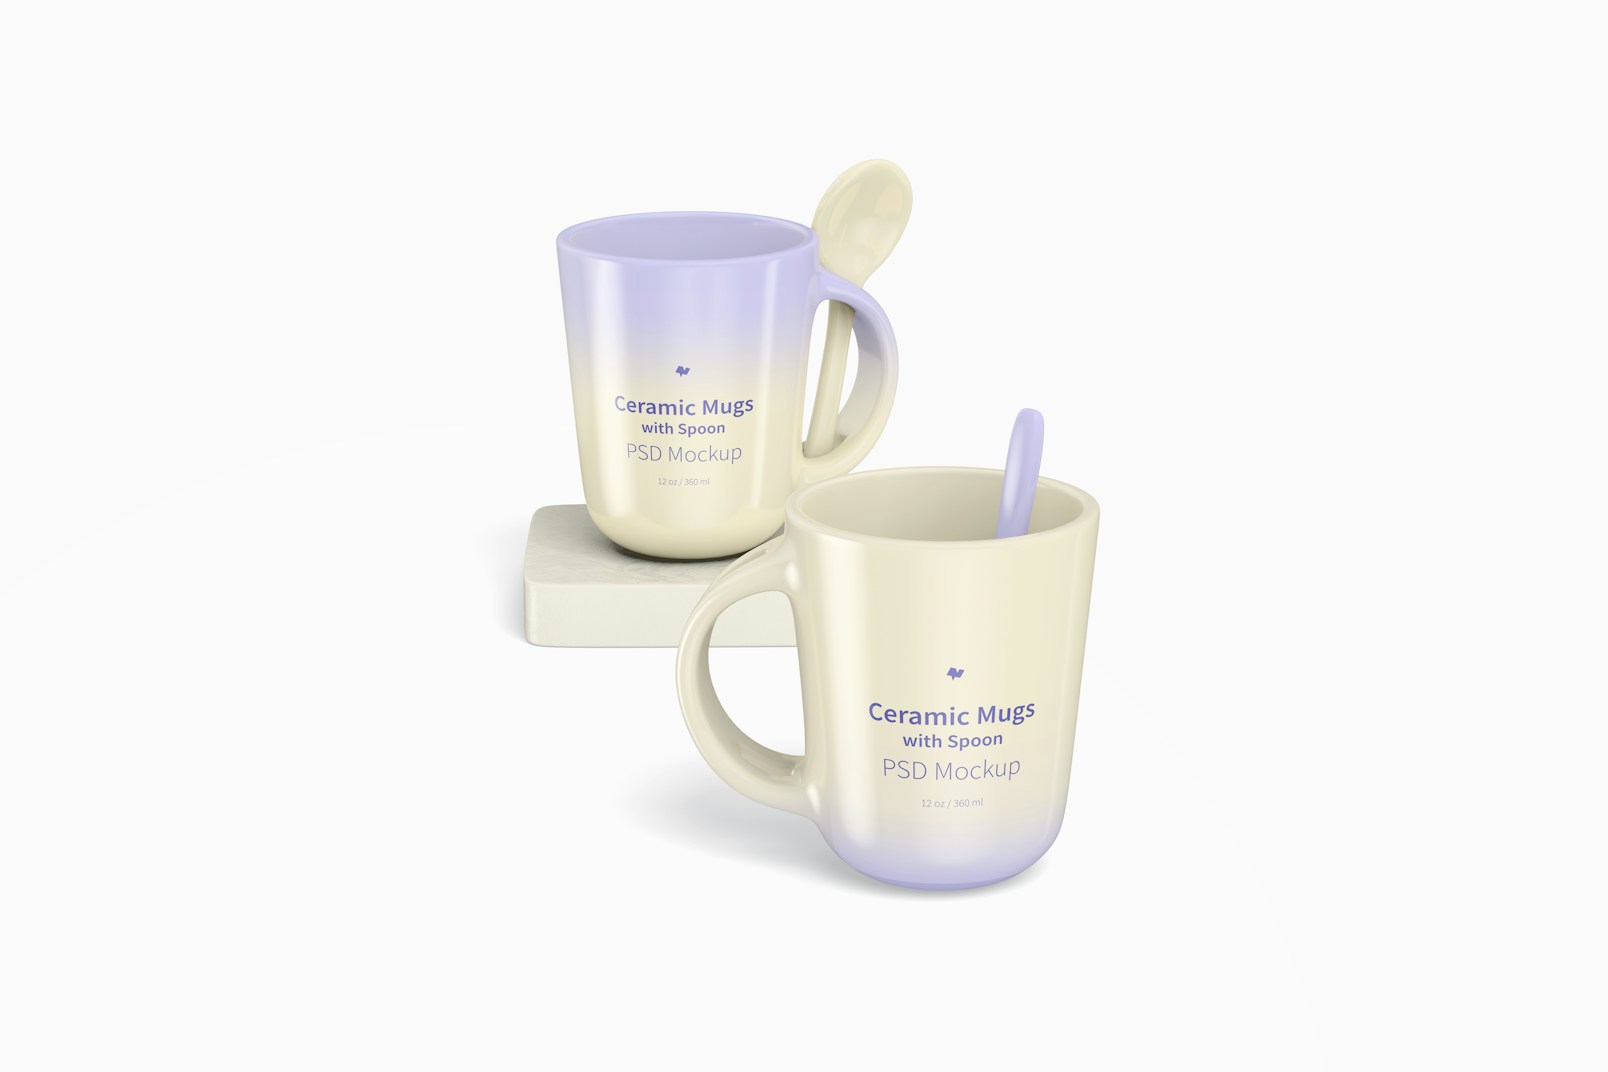 12 oz Ceramic Mugs with Spoon Mockup, Perspective